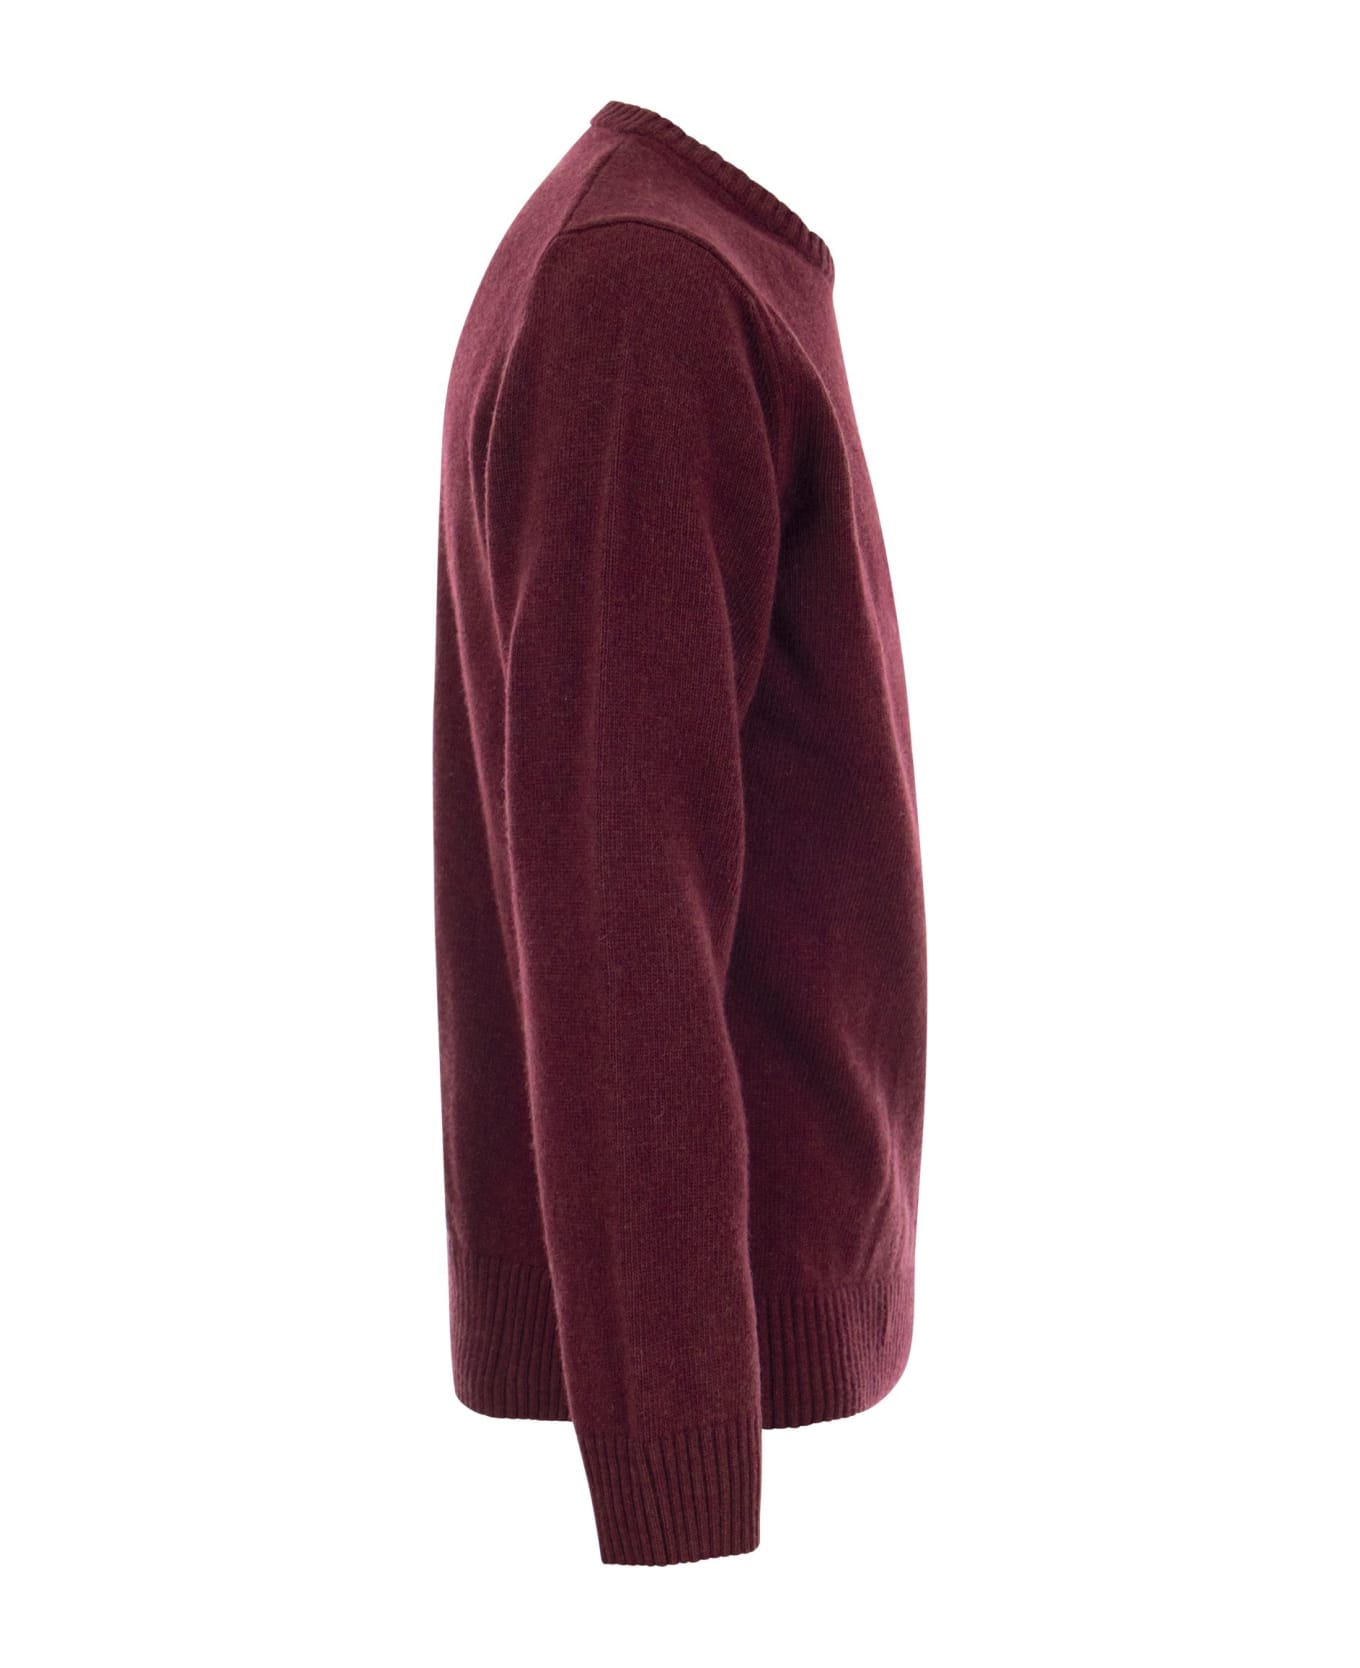 Paul&Shark Wool Crew Neck With Arm Patch Sweater - BORDEAUX